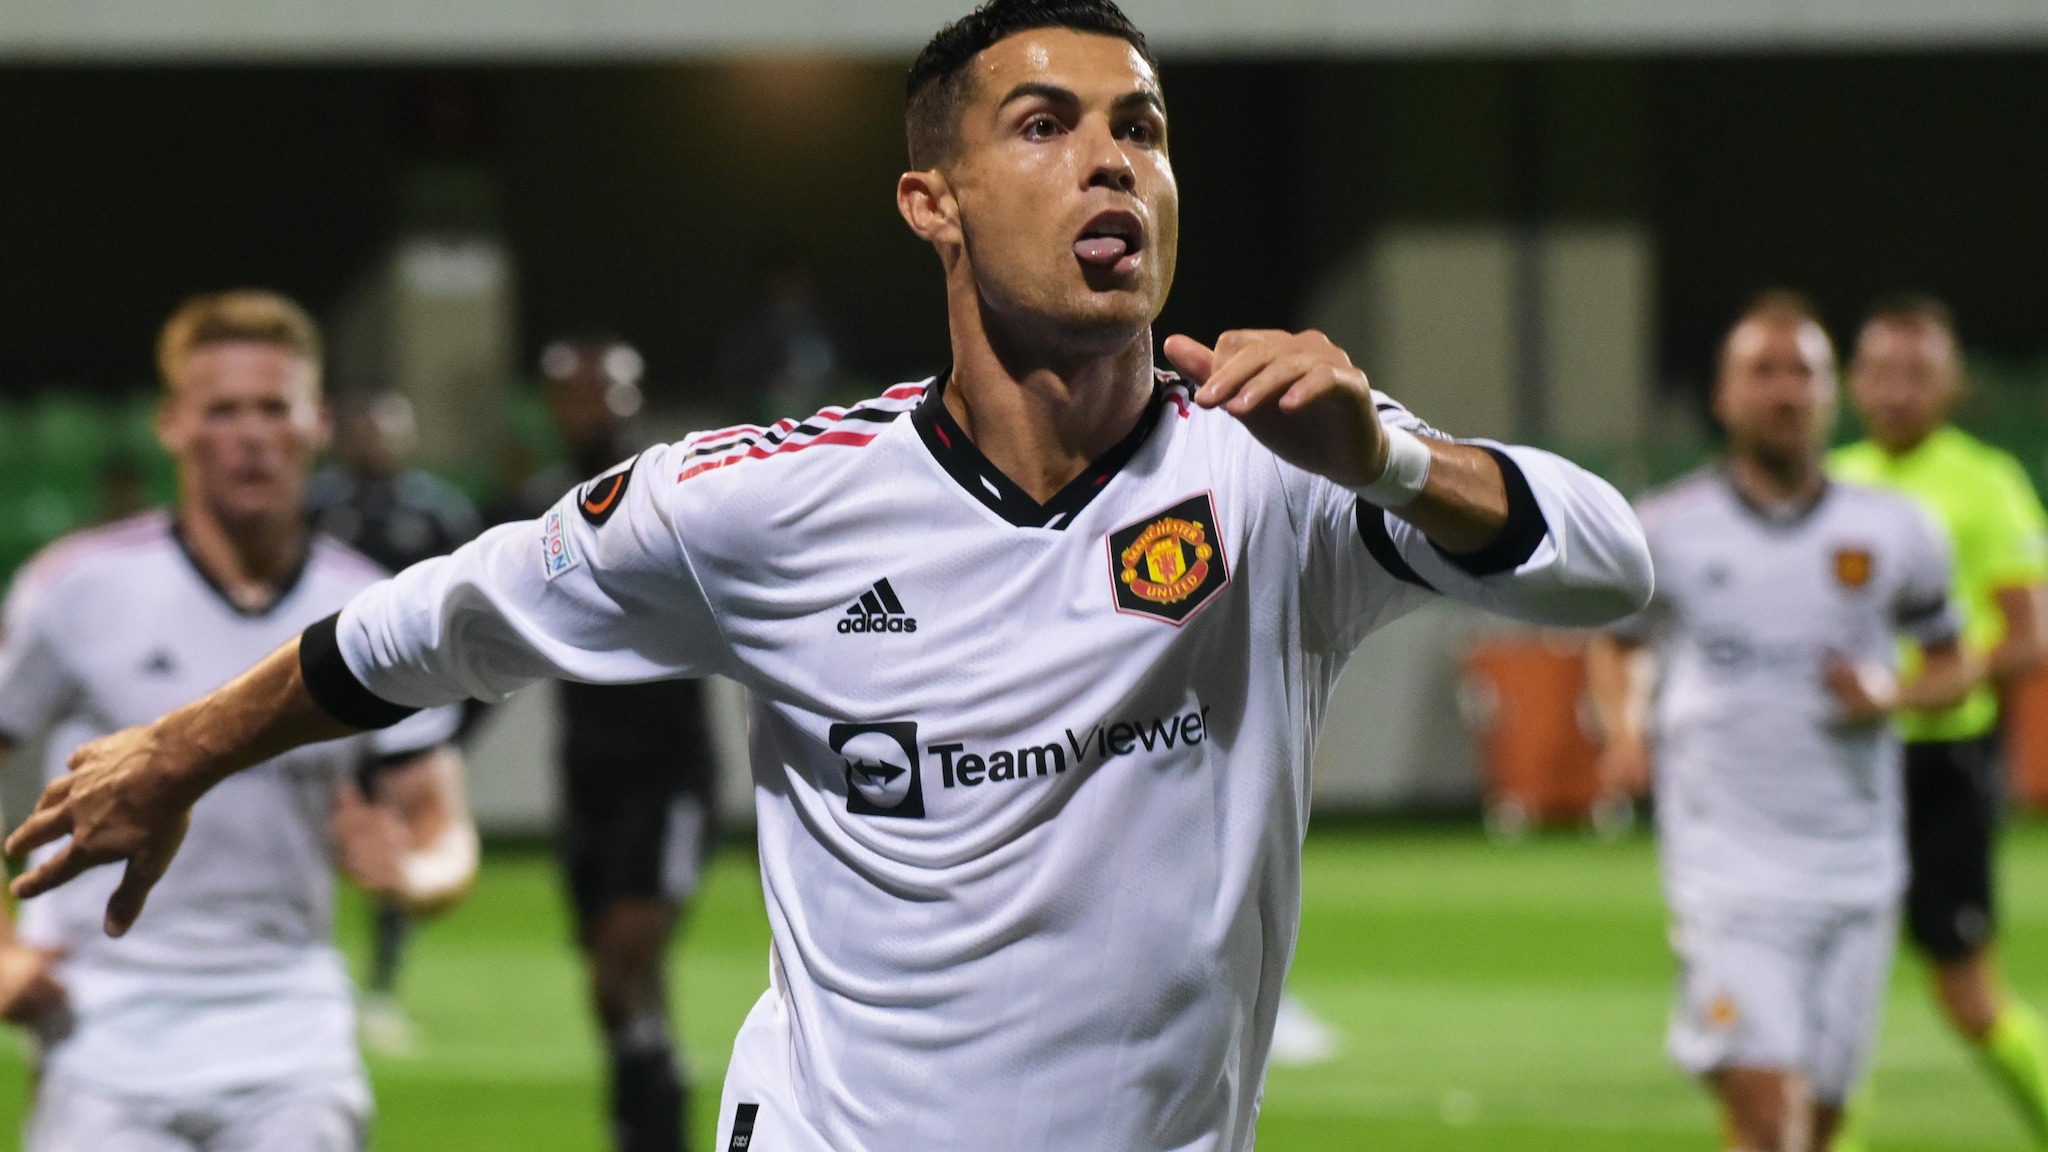 Europa League round-up: Cristiano Ronaldo scores in Man United win, Roma and Real Sociedad prevail